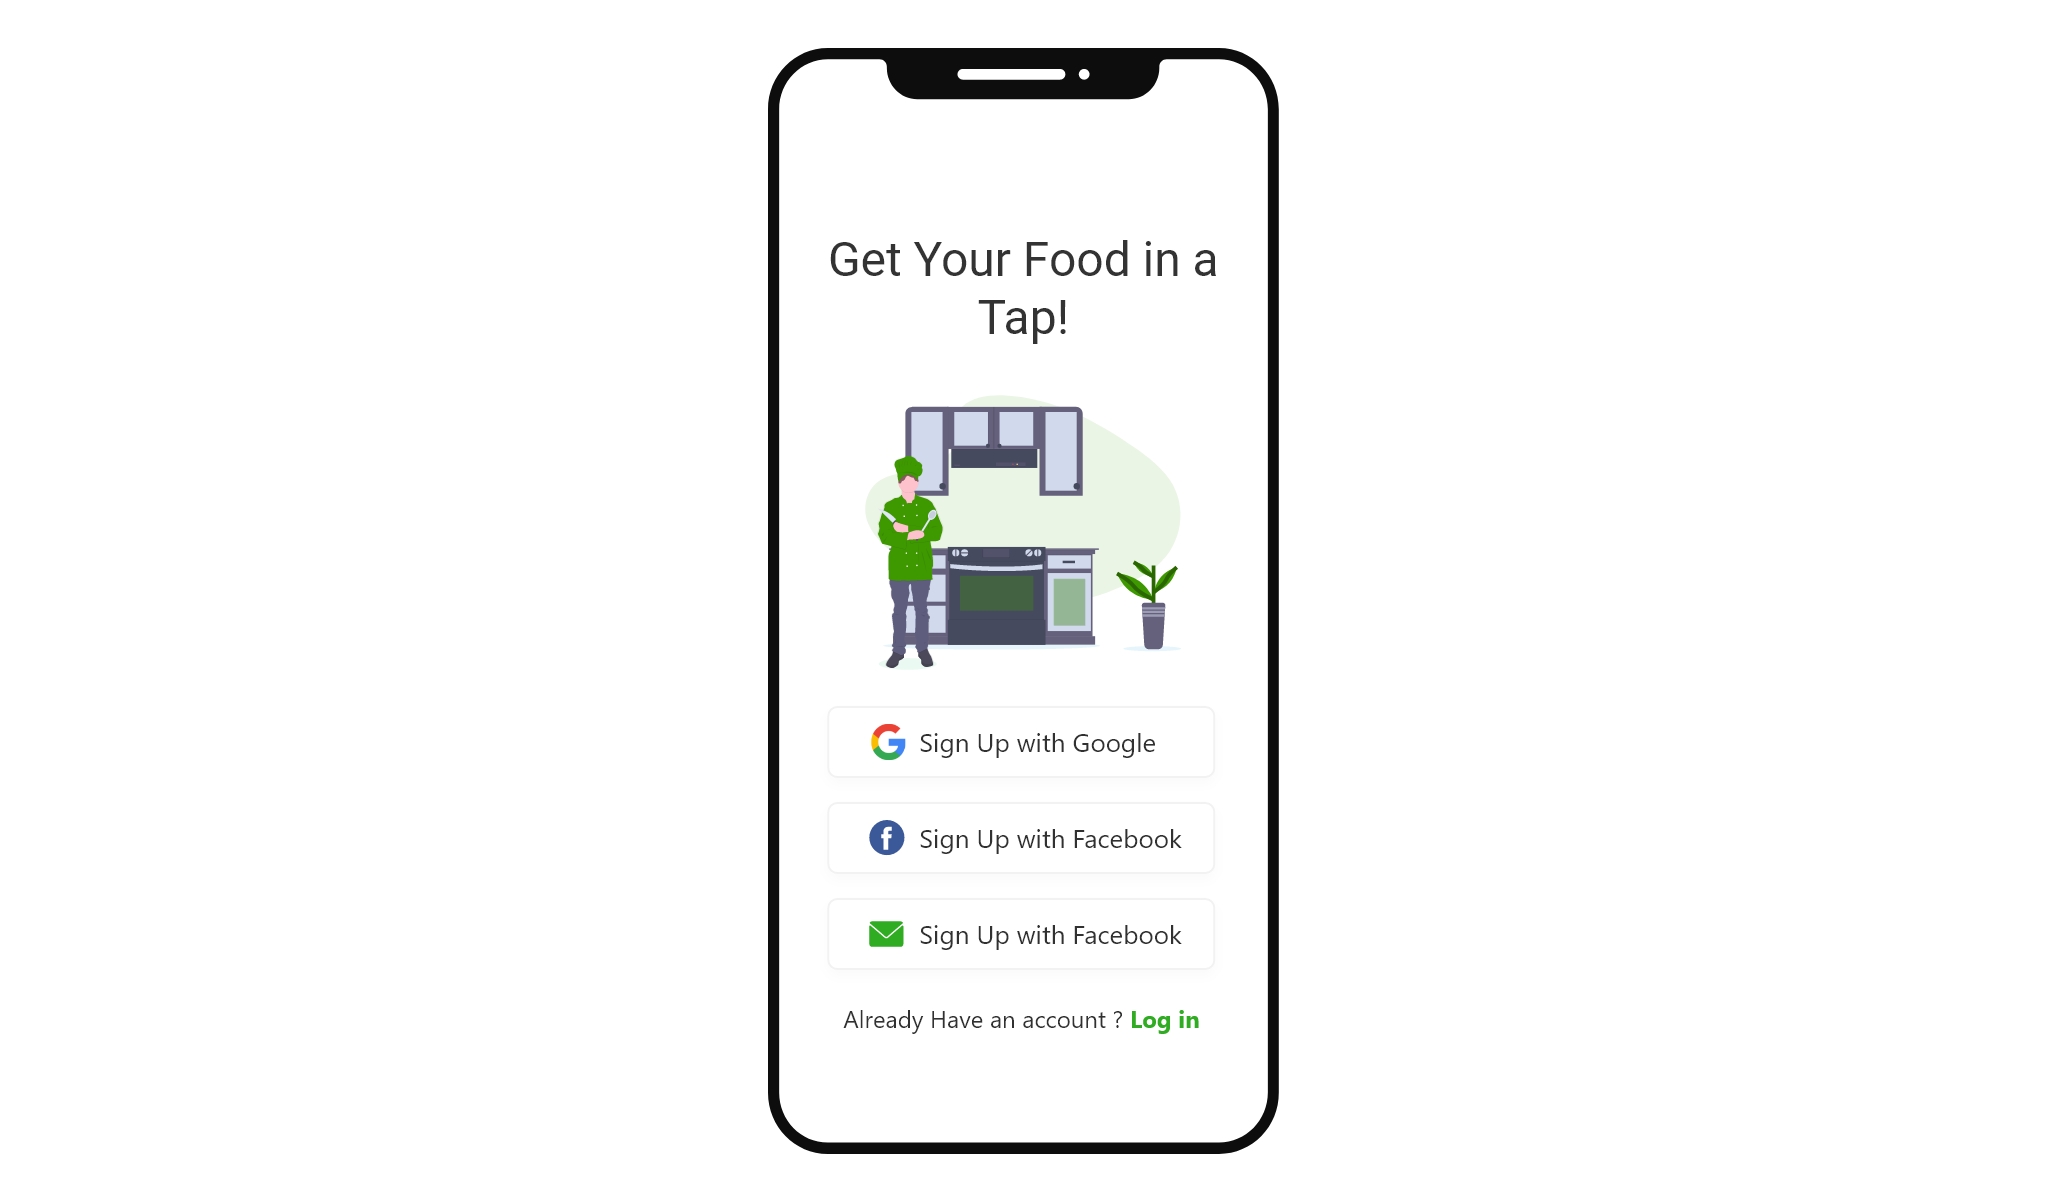 food delivery applications